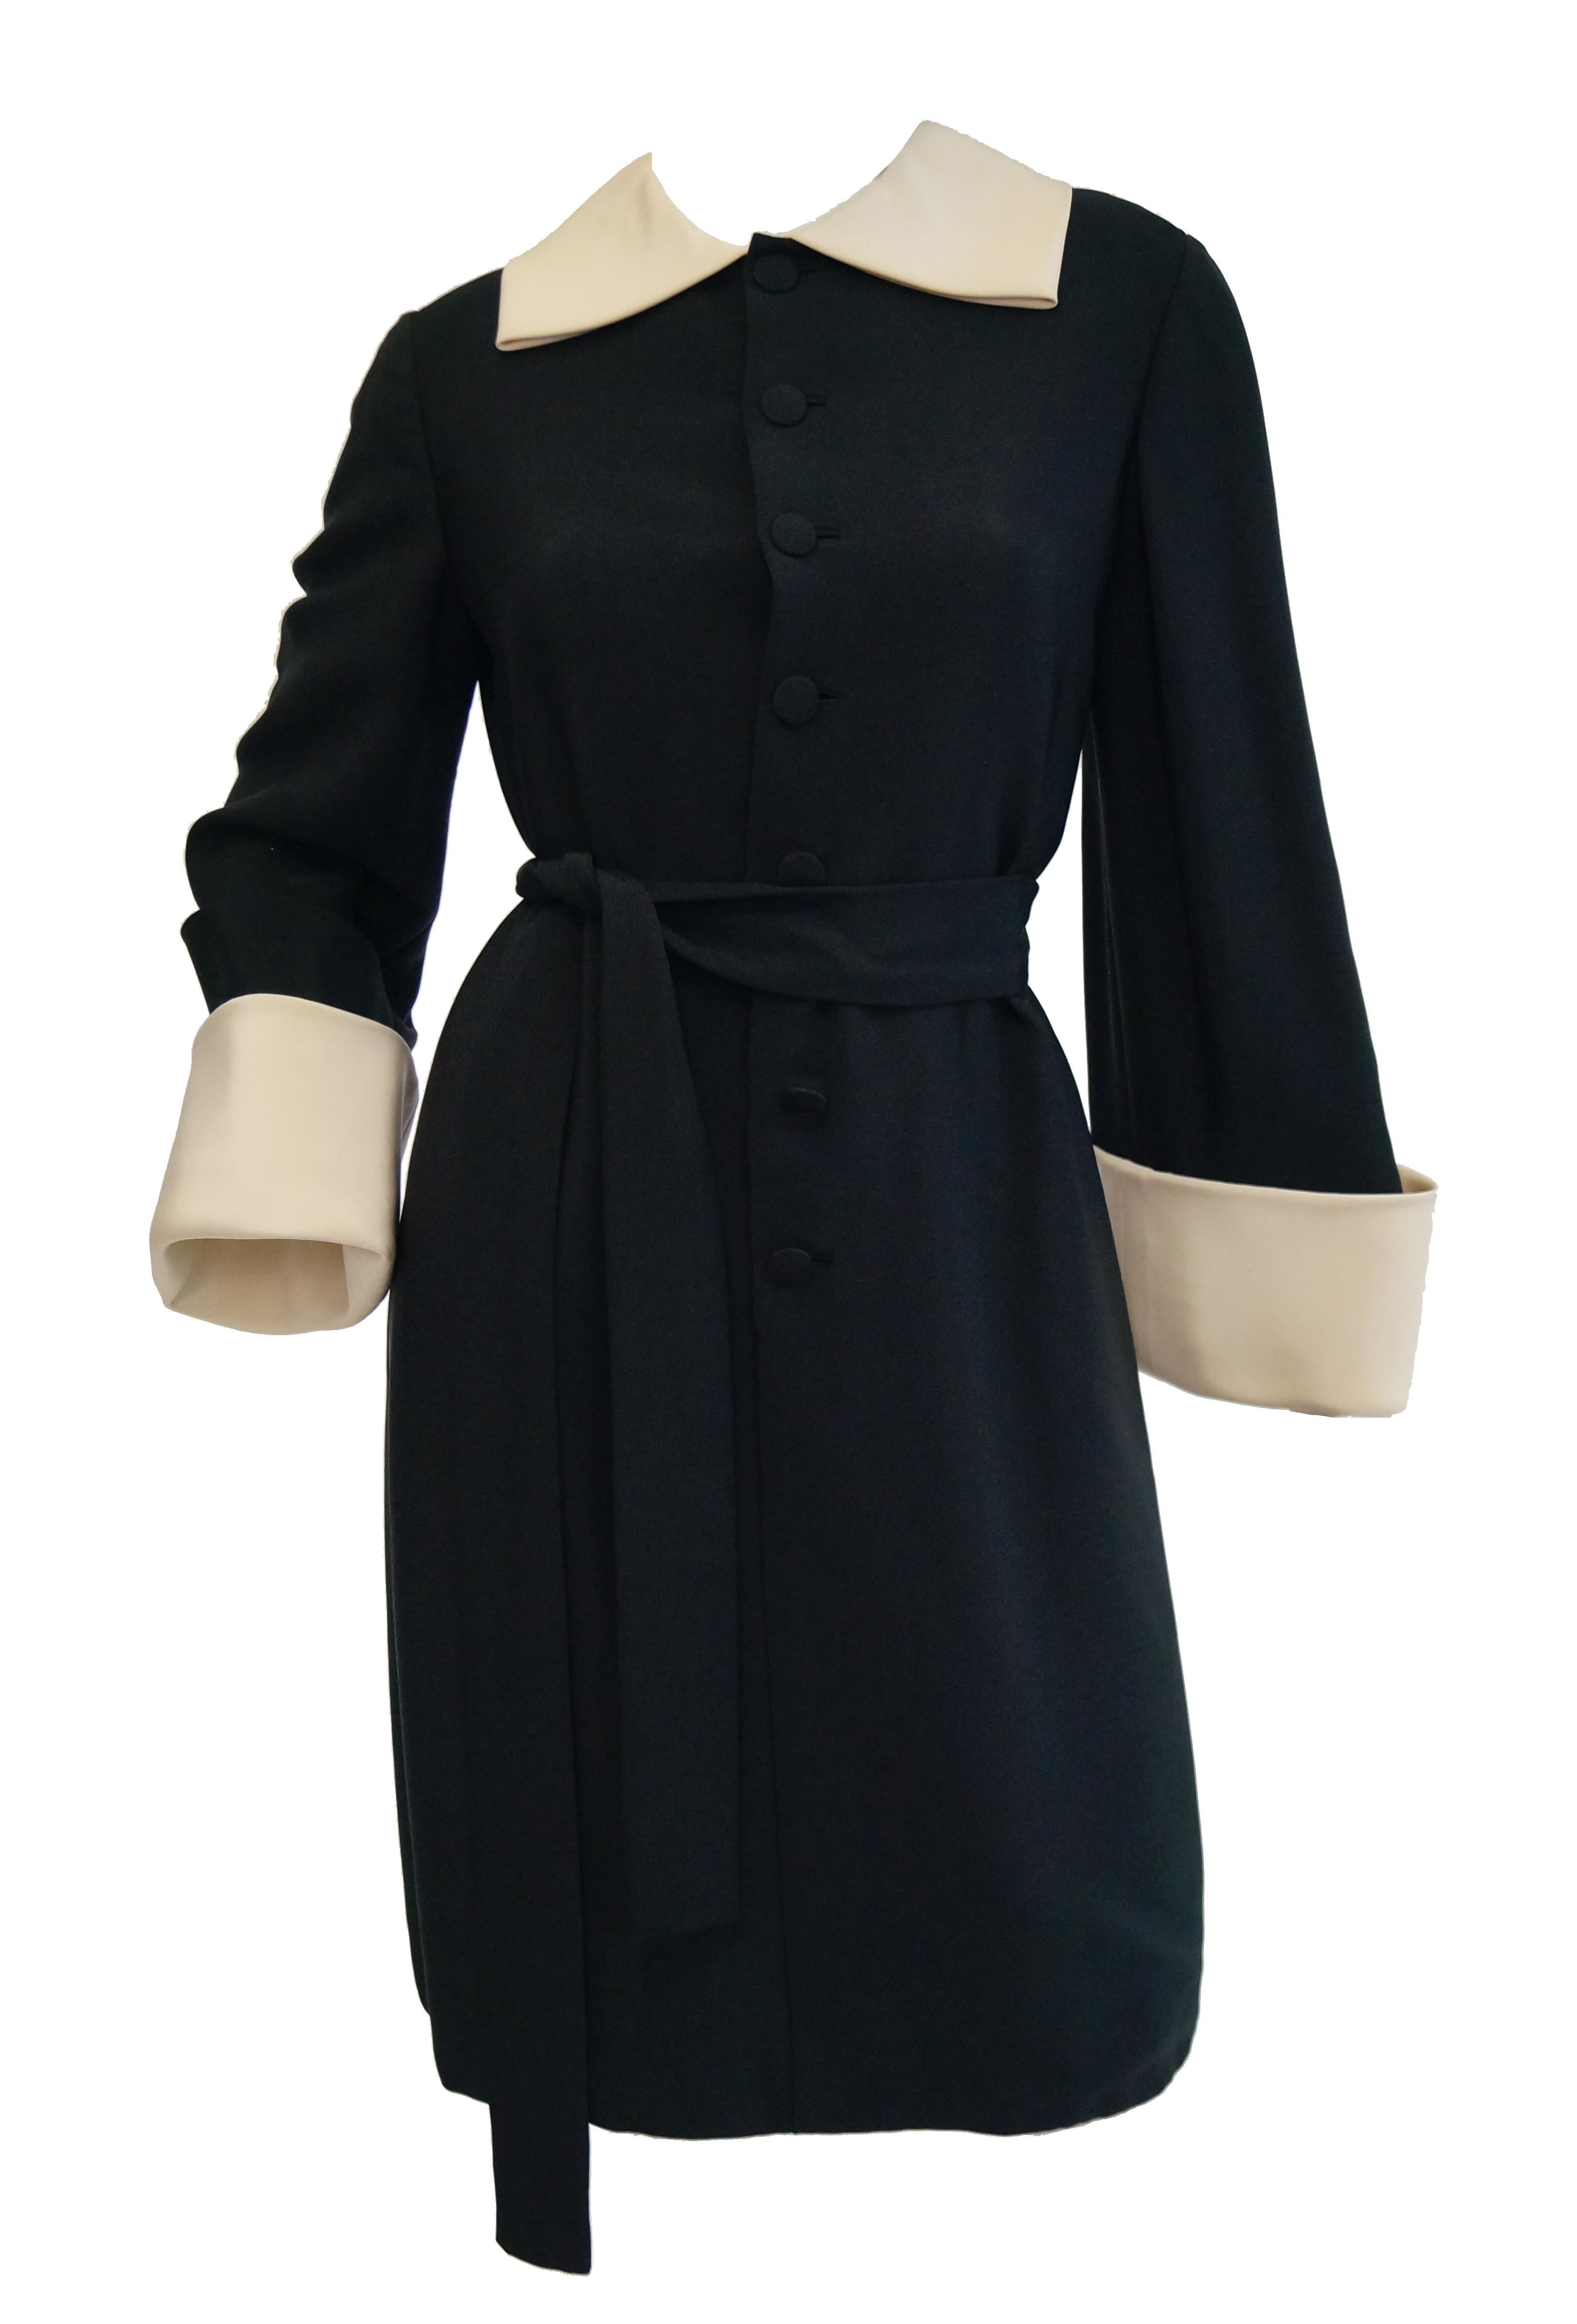 
Spectacular shift dress by Norman Norell!  The drama of this dress makes one feel as though it is a coat, with its large cuffed sleeves and large collar. The fabric is black silk with a nice hand. It also has a belt to cinch in the waist. It is a